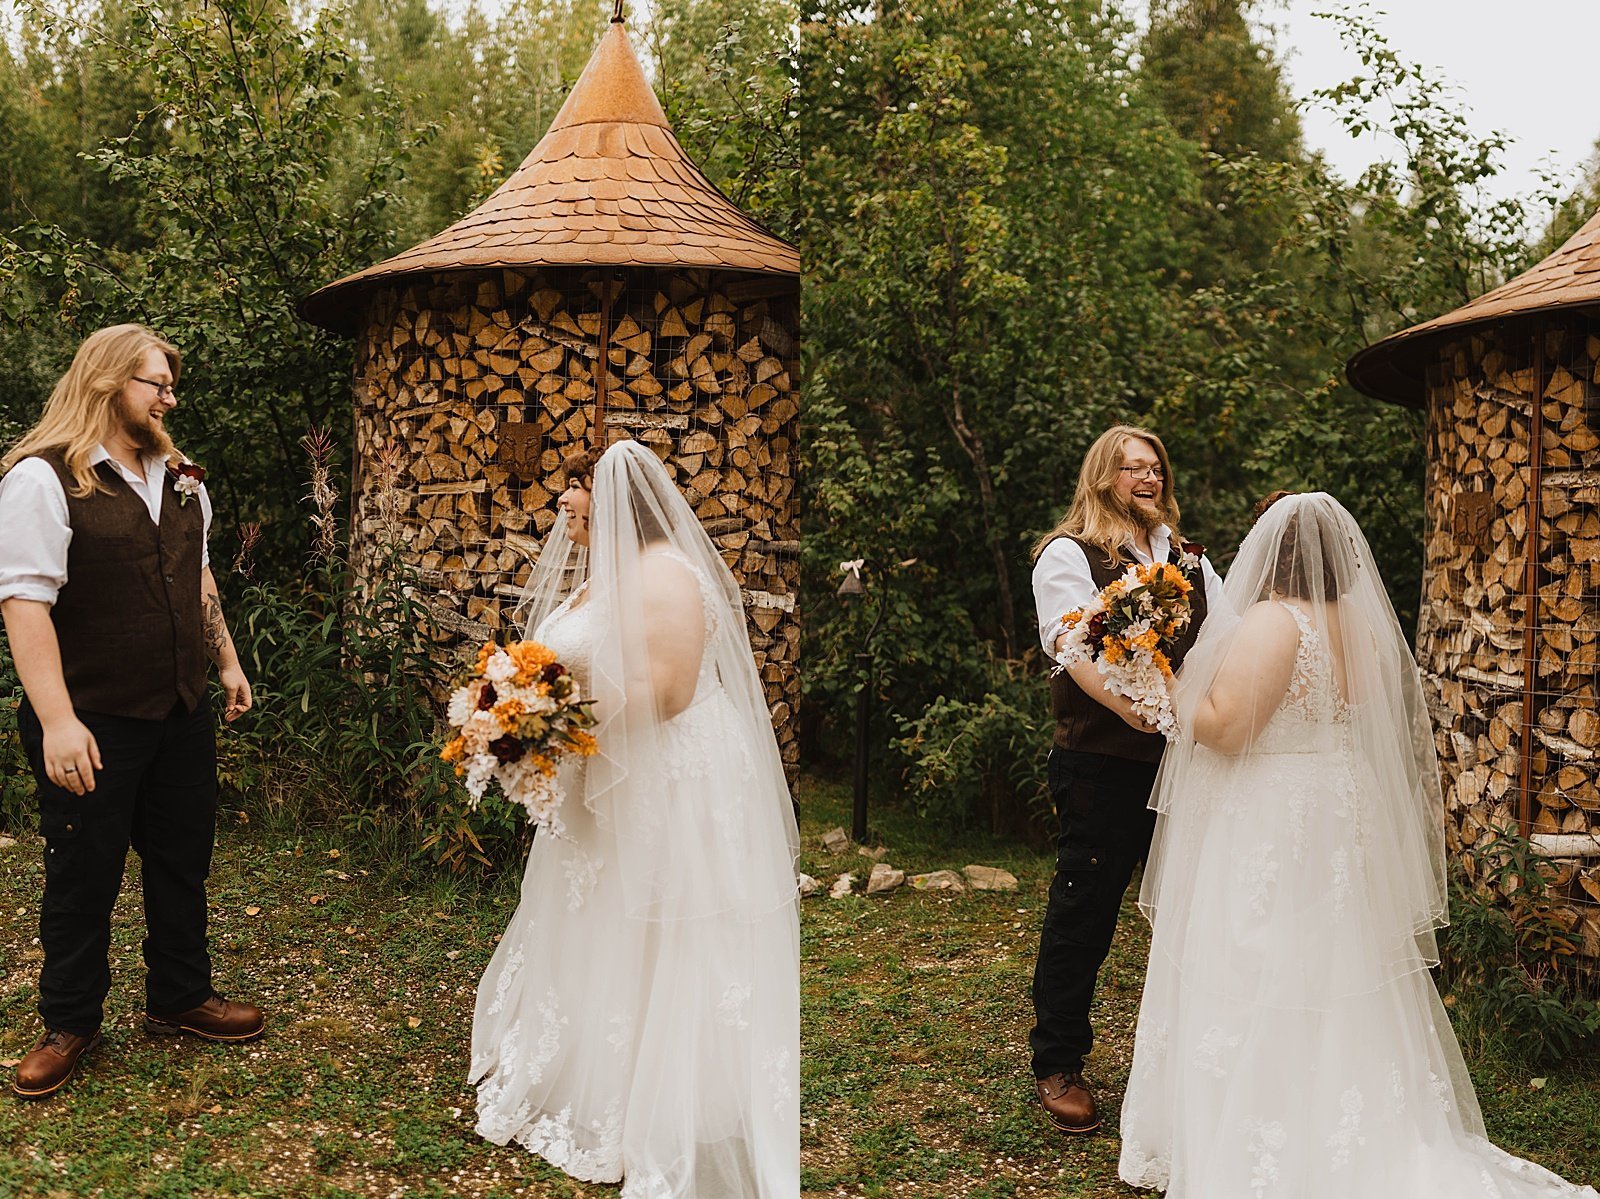  Bride and groom share a first look in a garden for their tiny wedding 